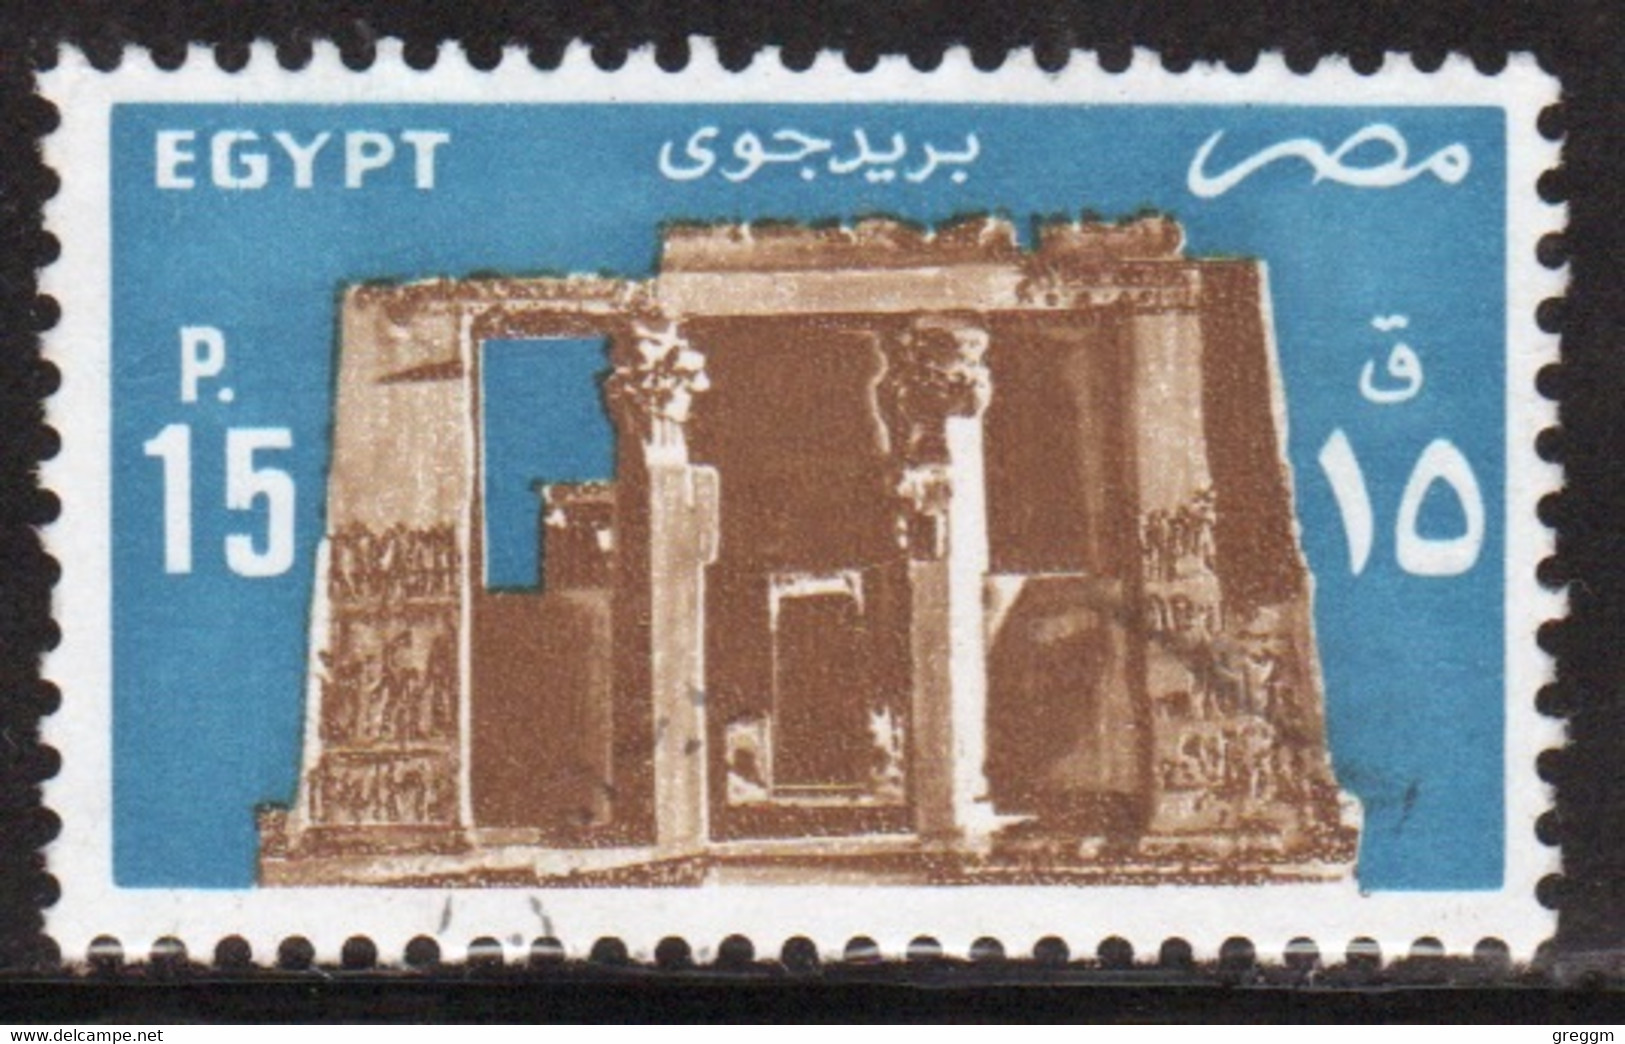 Egypt UAR 1985 Single 15p Stamp Issued To Celebrate Air Mail In Fine Used - Gebruikt